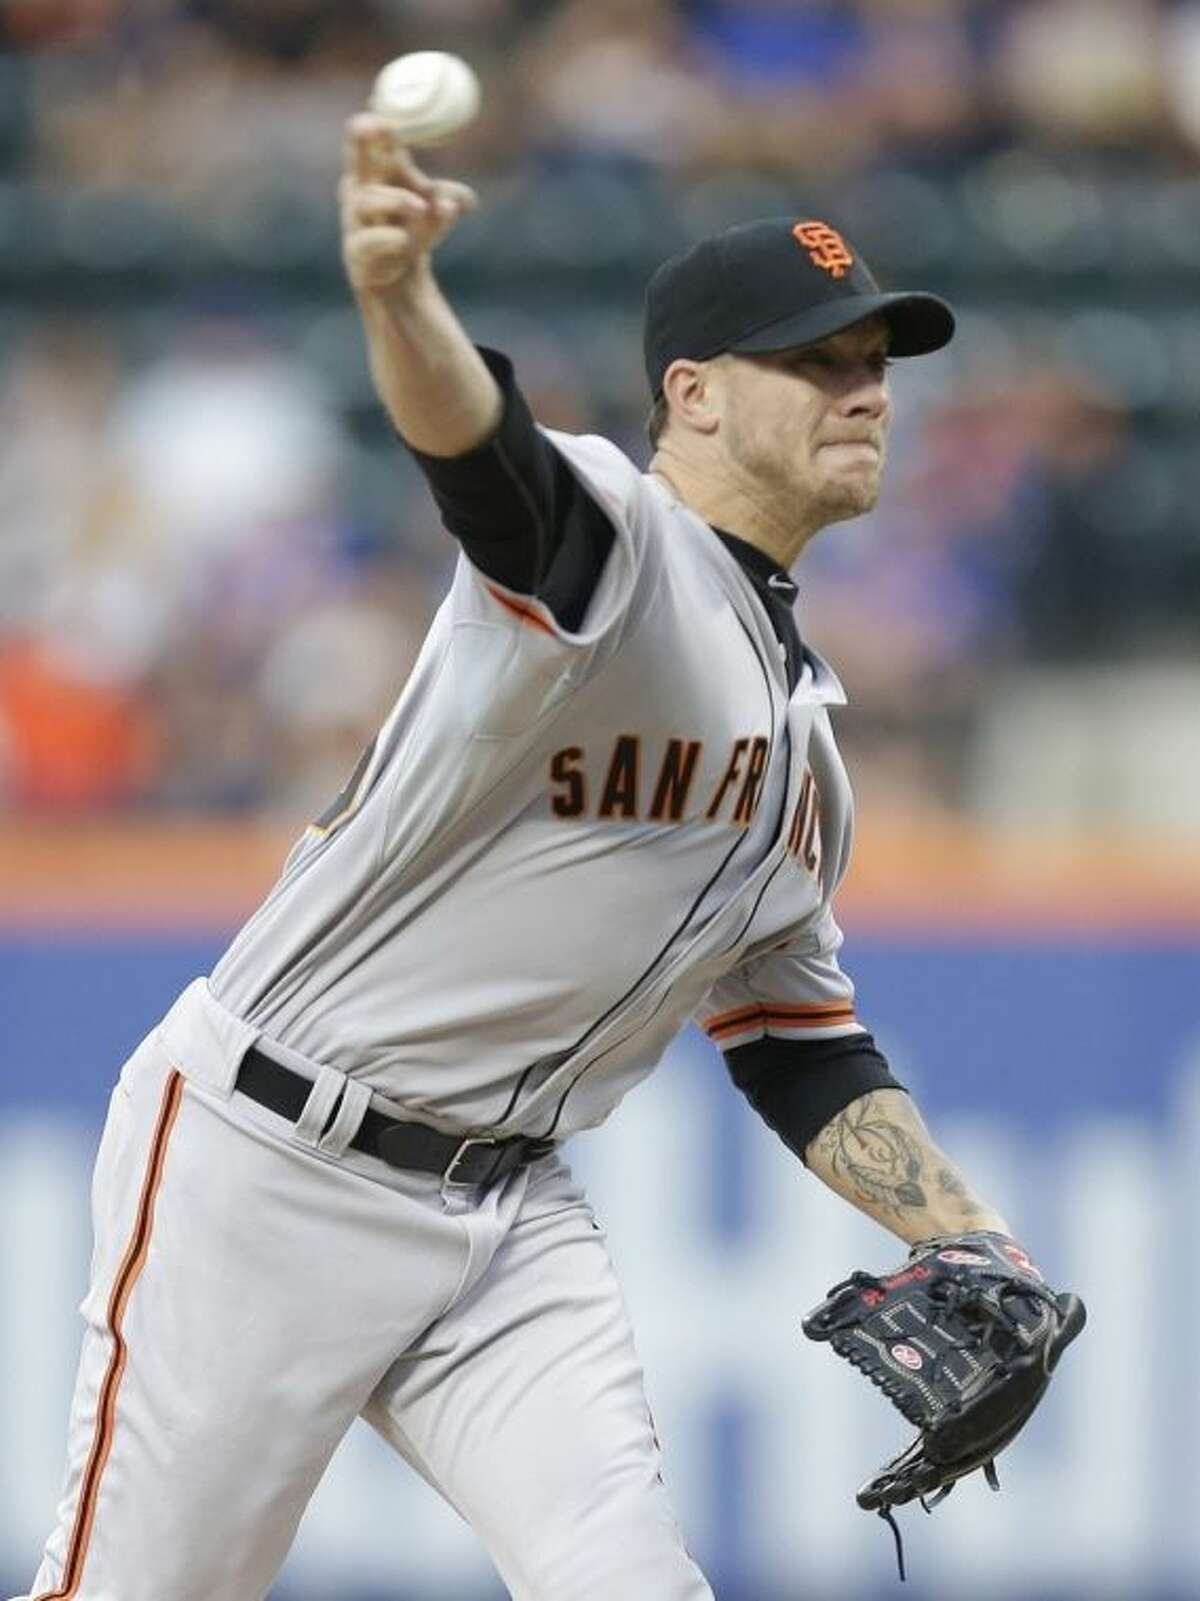 San Francisco Giants' Jake Peavy delivers a pitch during the first inning of a baseball game against the New York Mets on Saturday, Aug. 2, 2014, in New York. (AP Photo/Frank Franklin II)